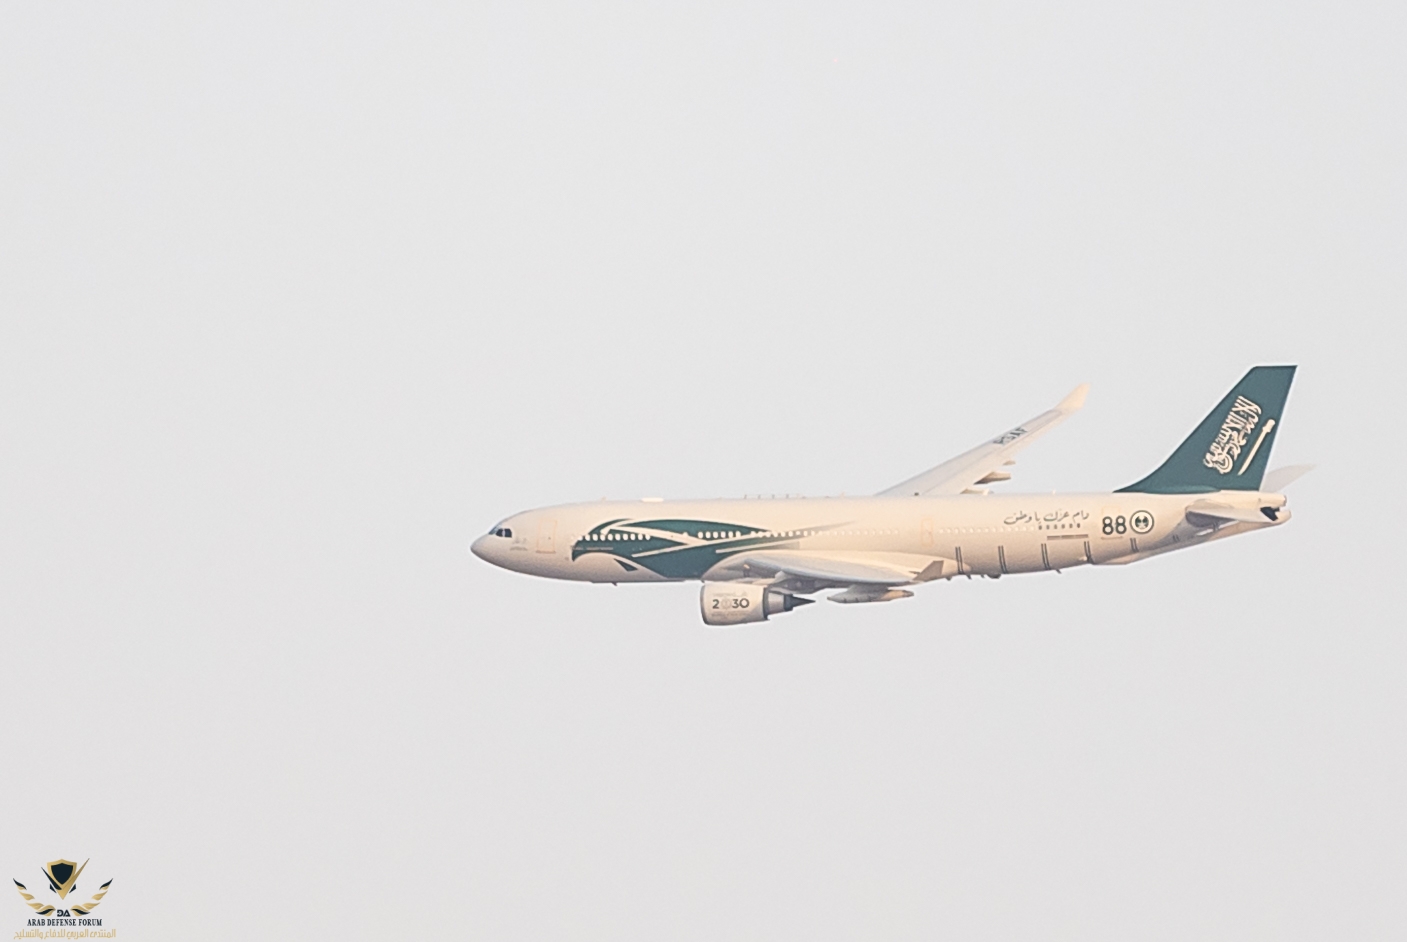 RSAF_(Royal_Saudi_Air_Force)_jet_in_special_livery_for_the_88th_National_Day_Celebrations_(443...jpg